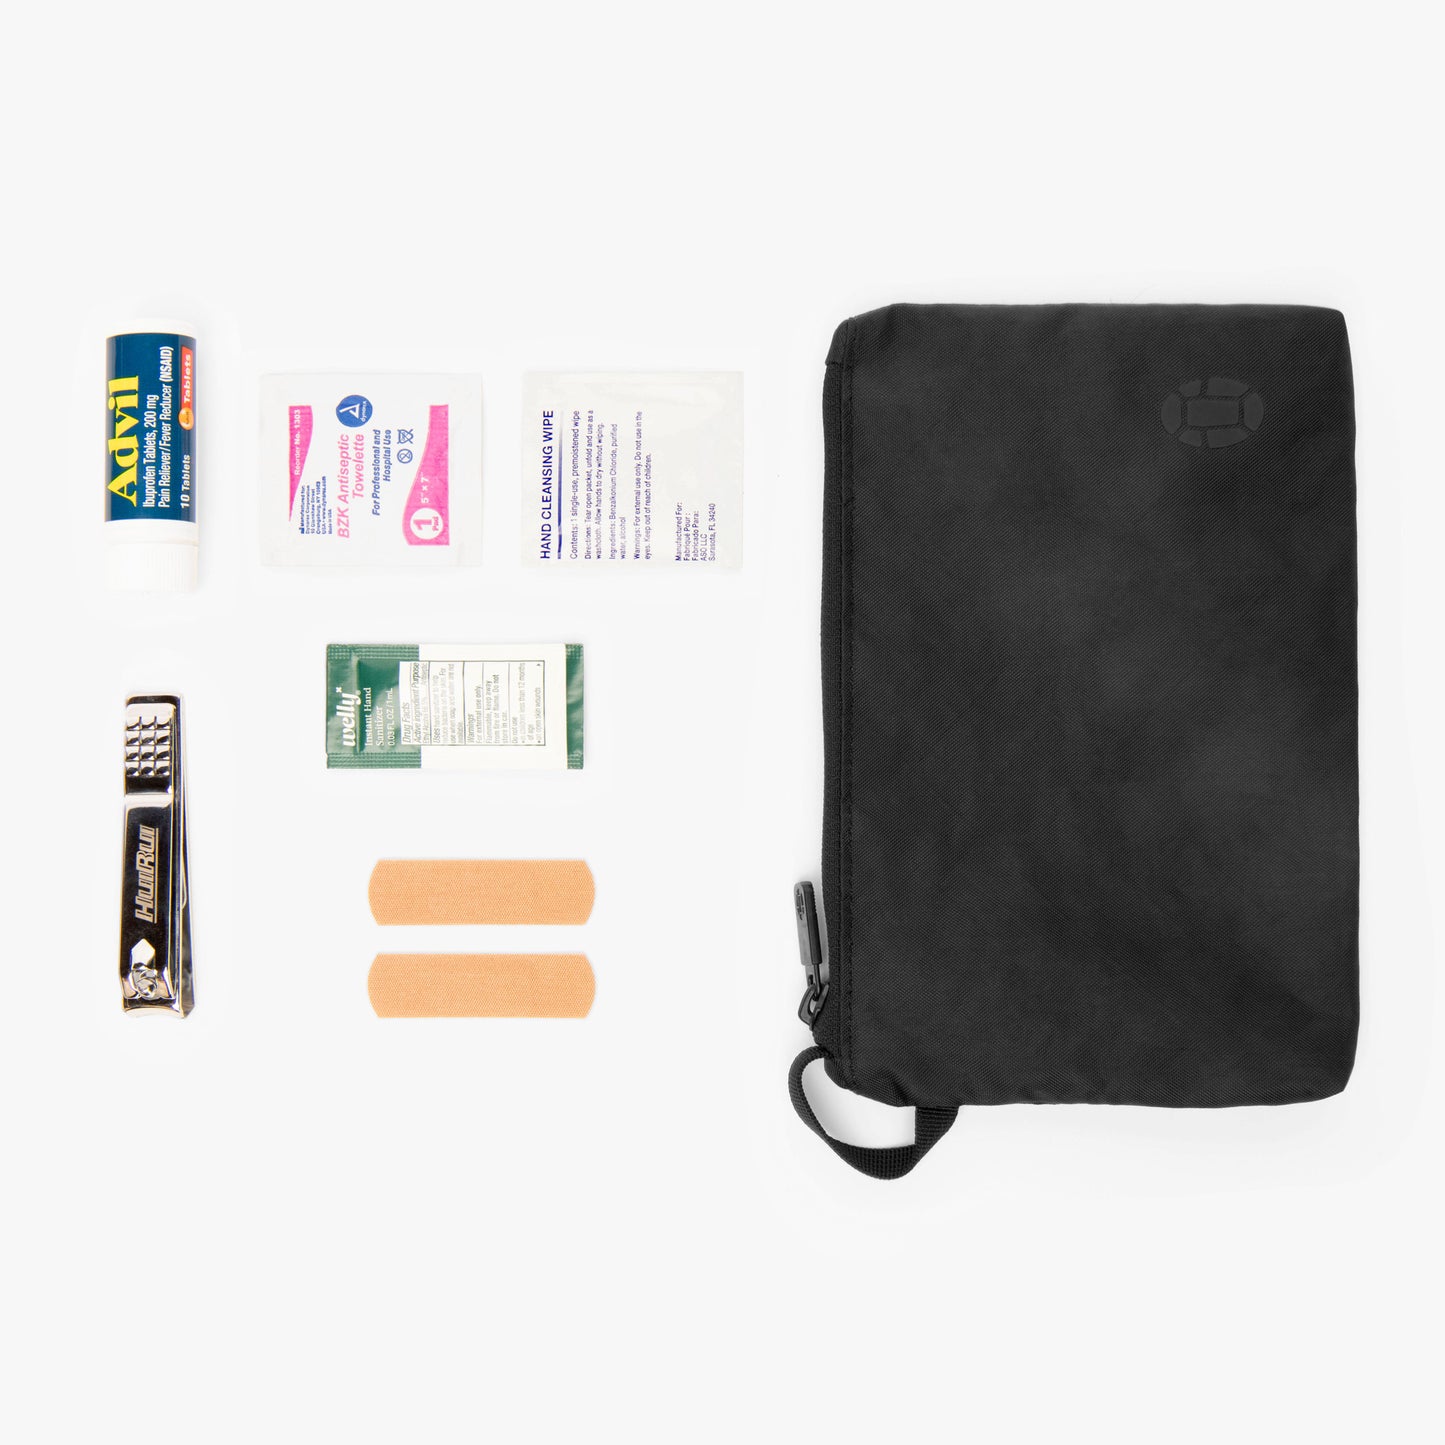 Toiletries in the small pouch